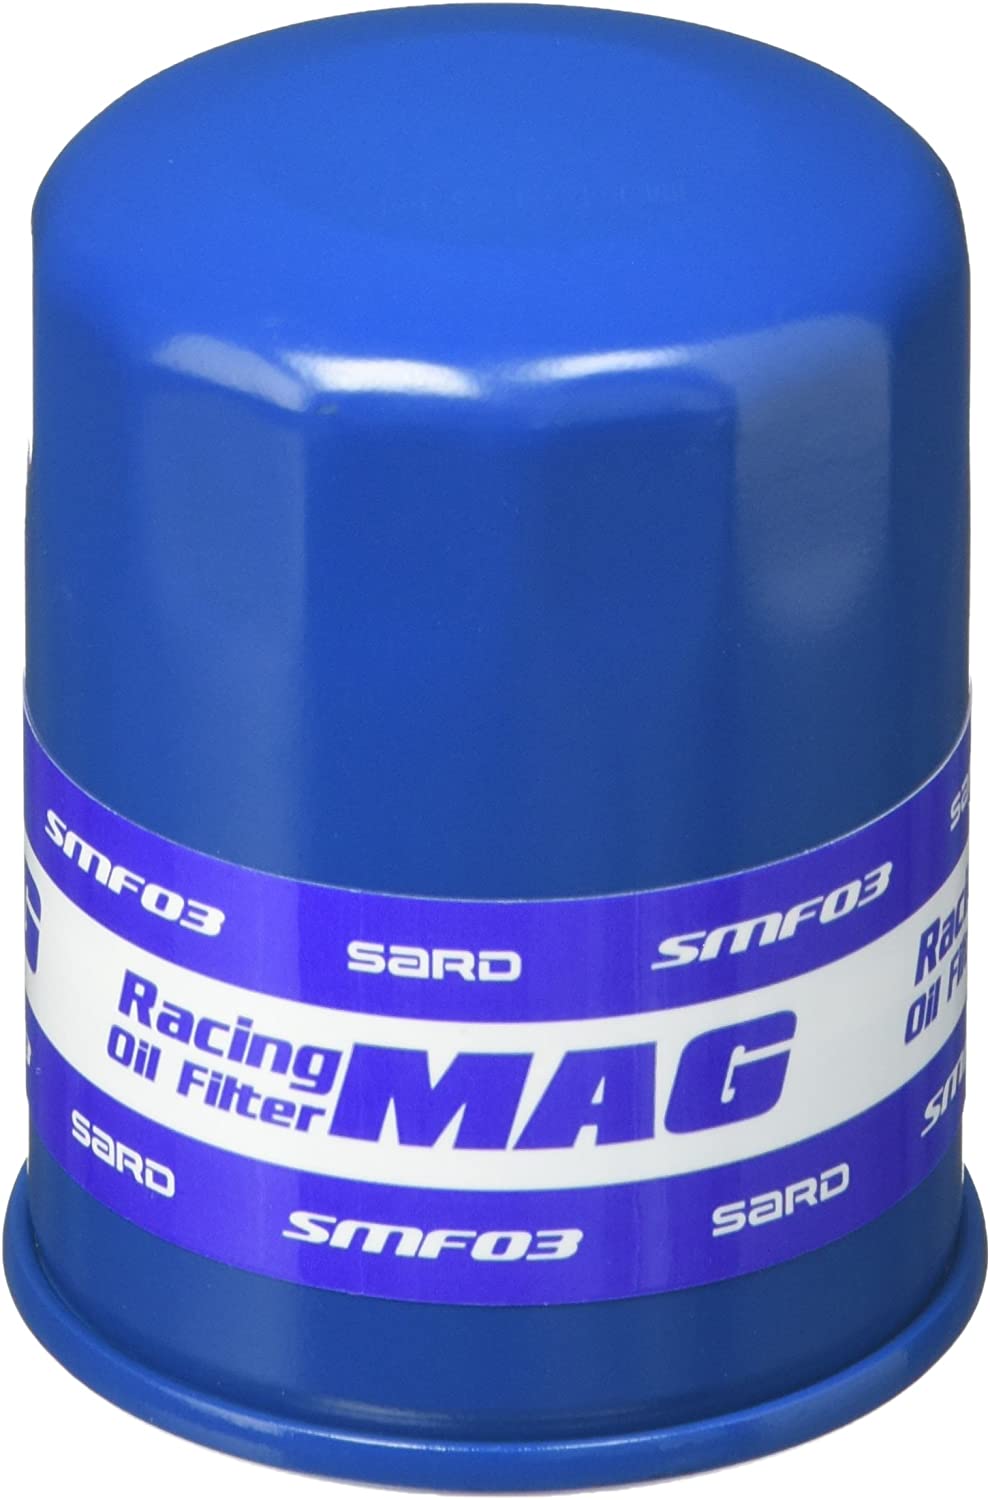 SARD RACING OIL FILTER For MR2 AW11 SMF00